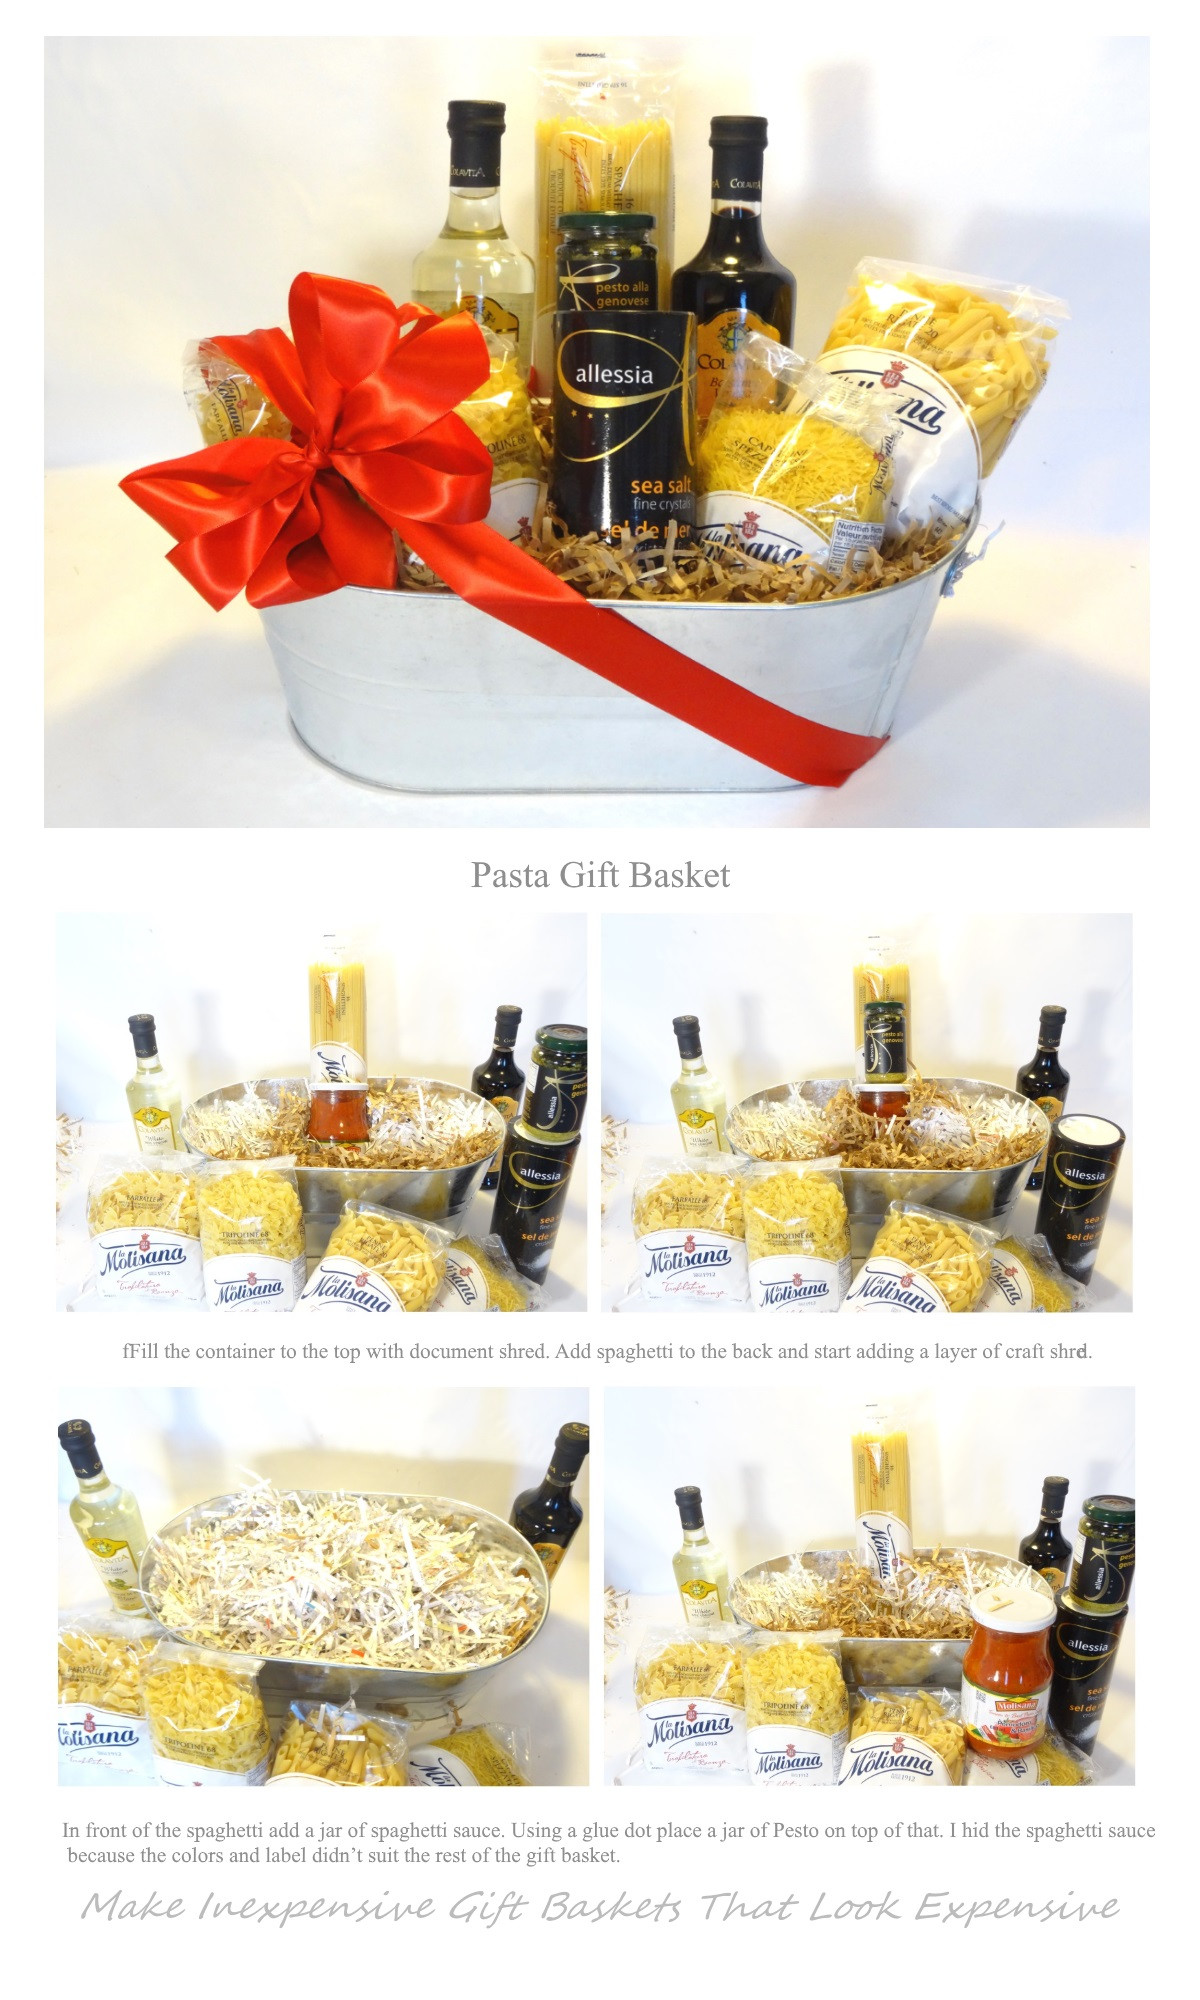 Inexpensive Gift Baskets Ideas
 Make Inexpensive Gift Baskets that Look Expensive Book